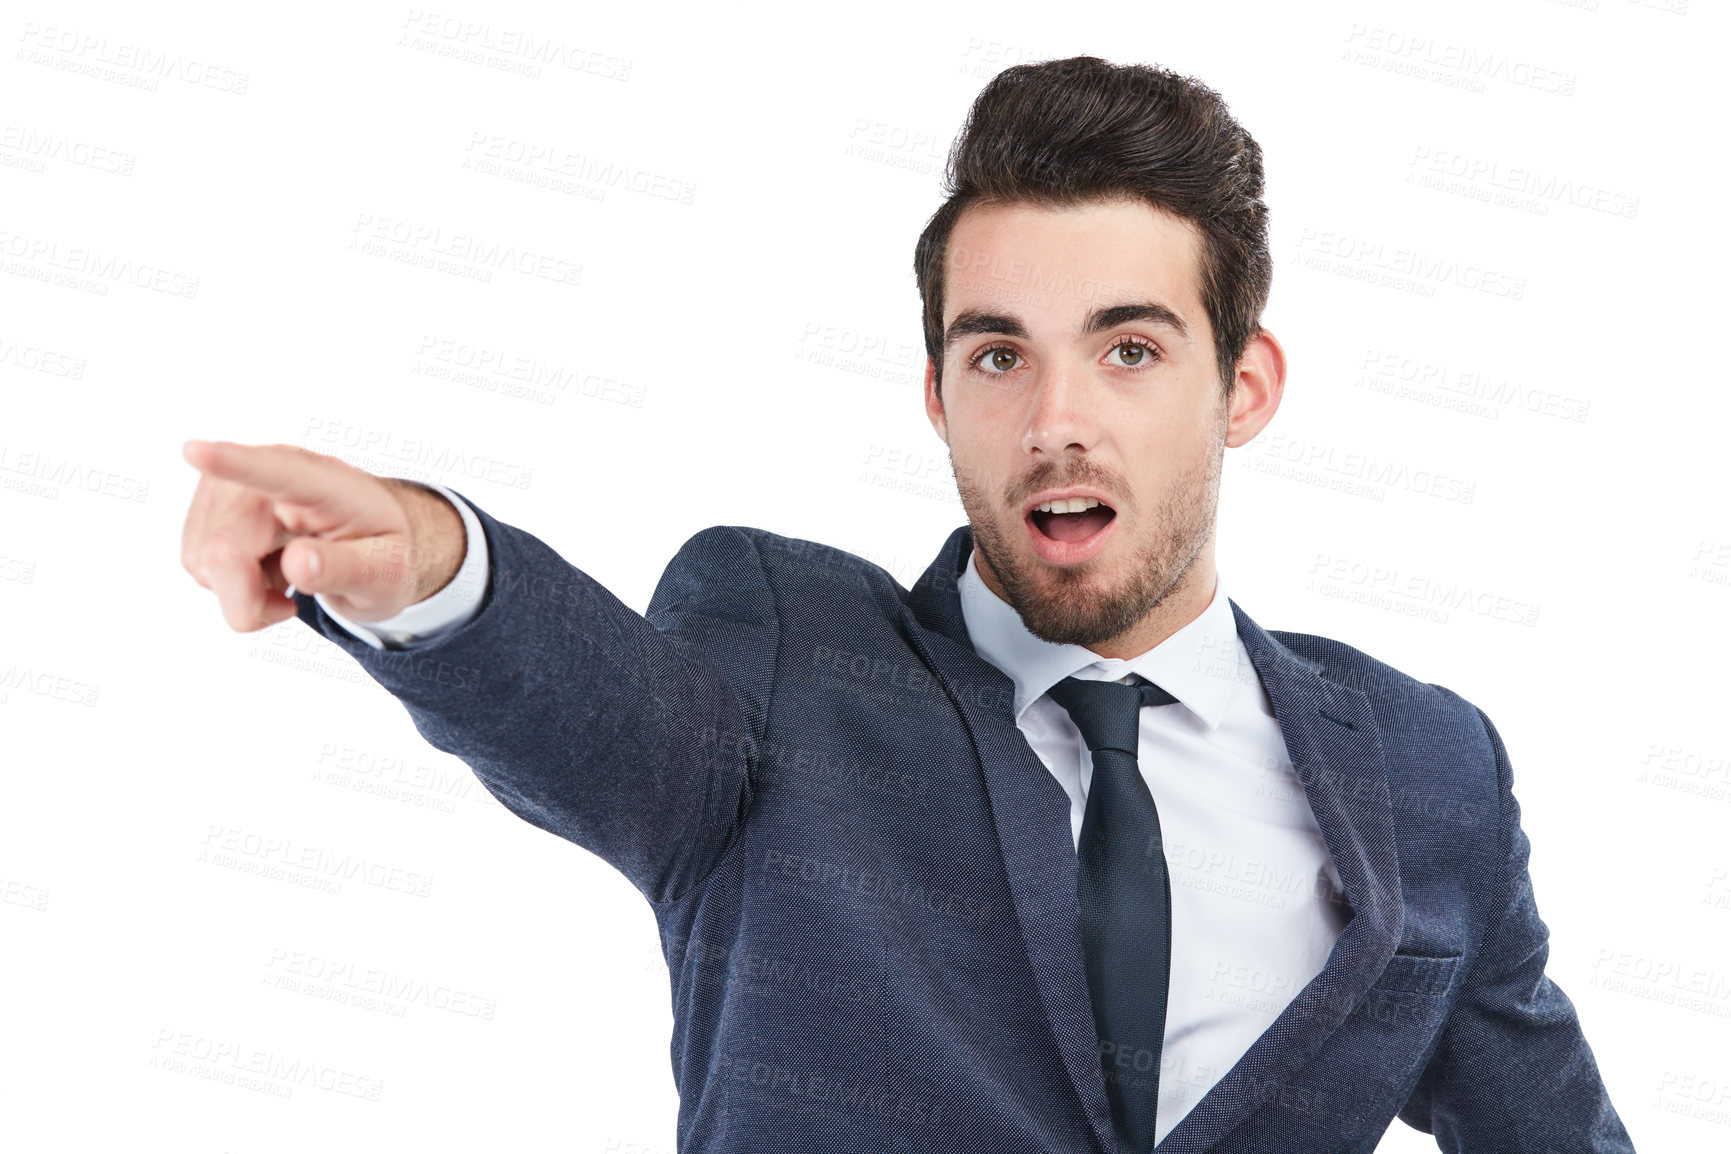 Buy stock photo Studio shot of a young businessman pointing towards something against a white background